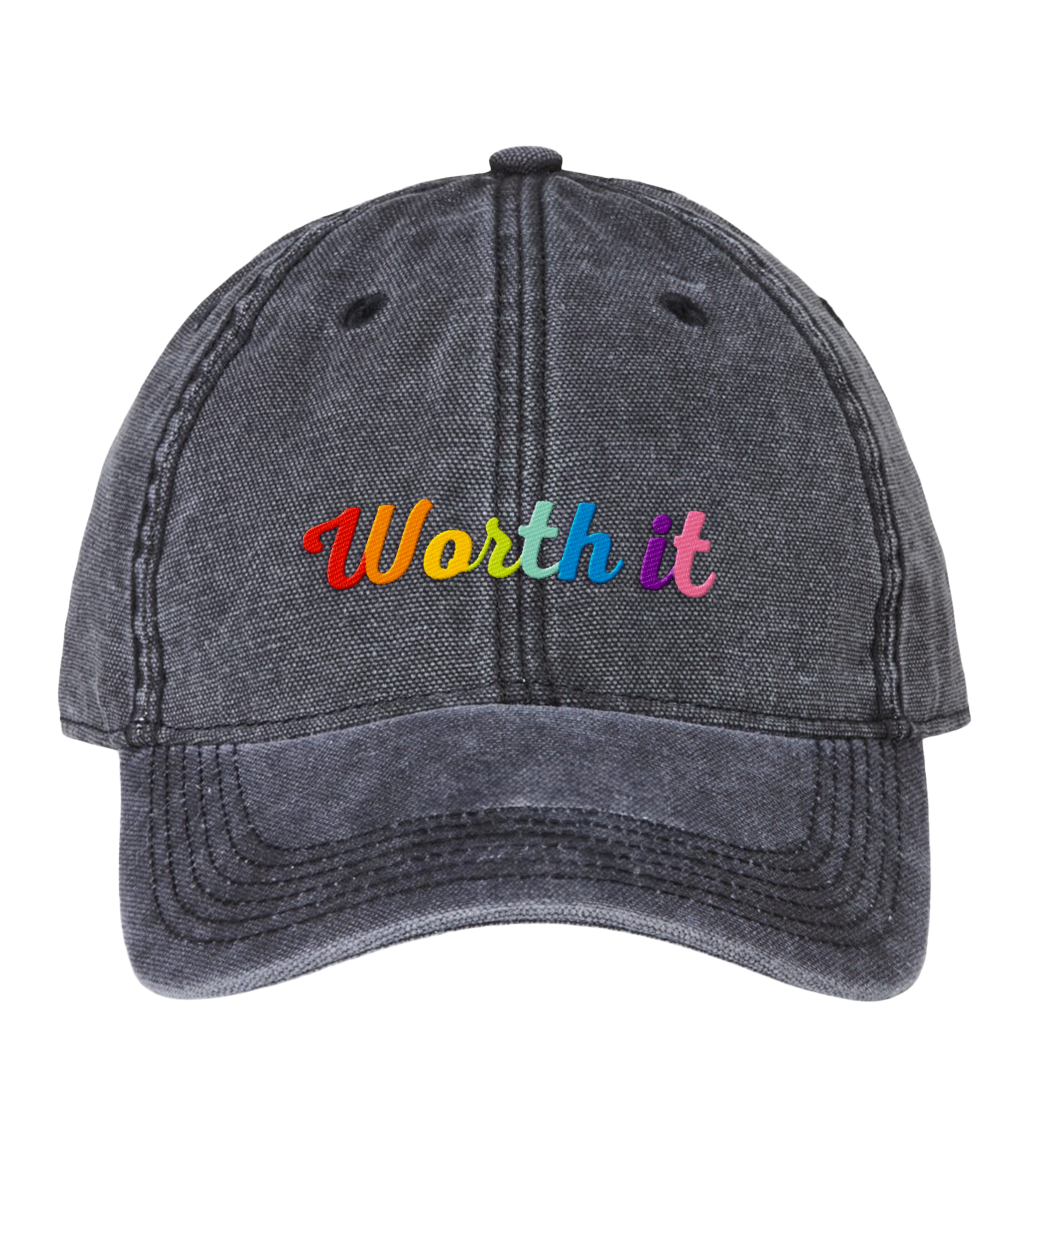 Black acid washed cotton 6 panel dad hat with embroidered text 